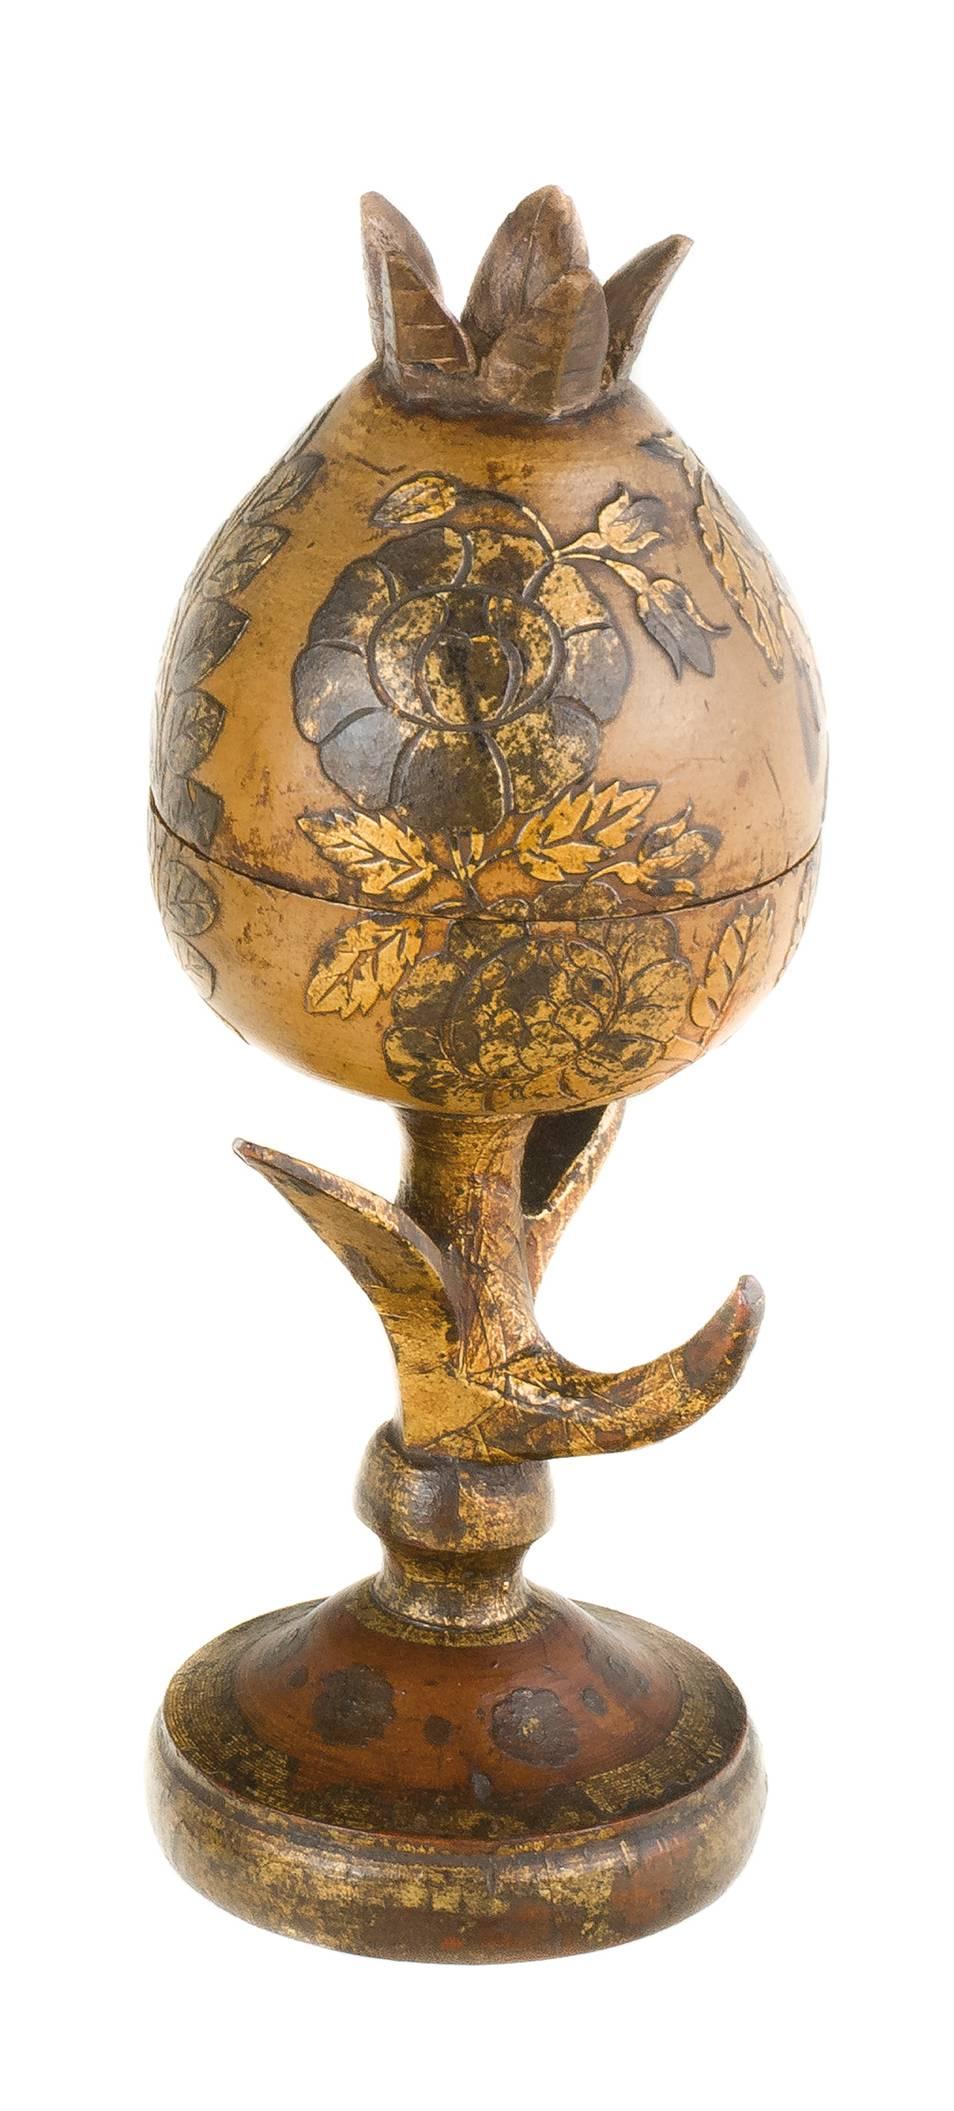 Cup with cover,
Colombia, 17th century.
Carved wood in pomegranate form.
Flowers decoration in Barniz de Pasto
High 25 cm.